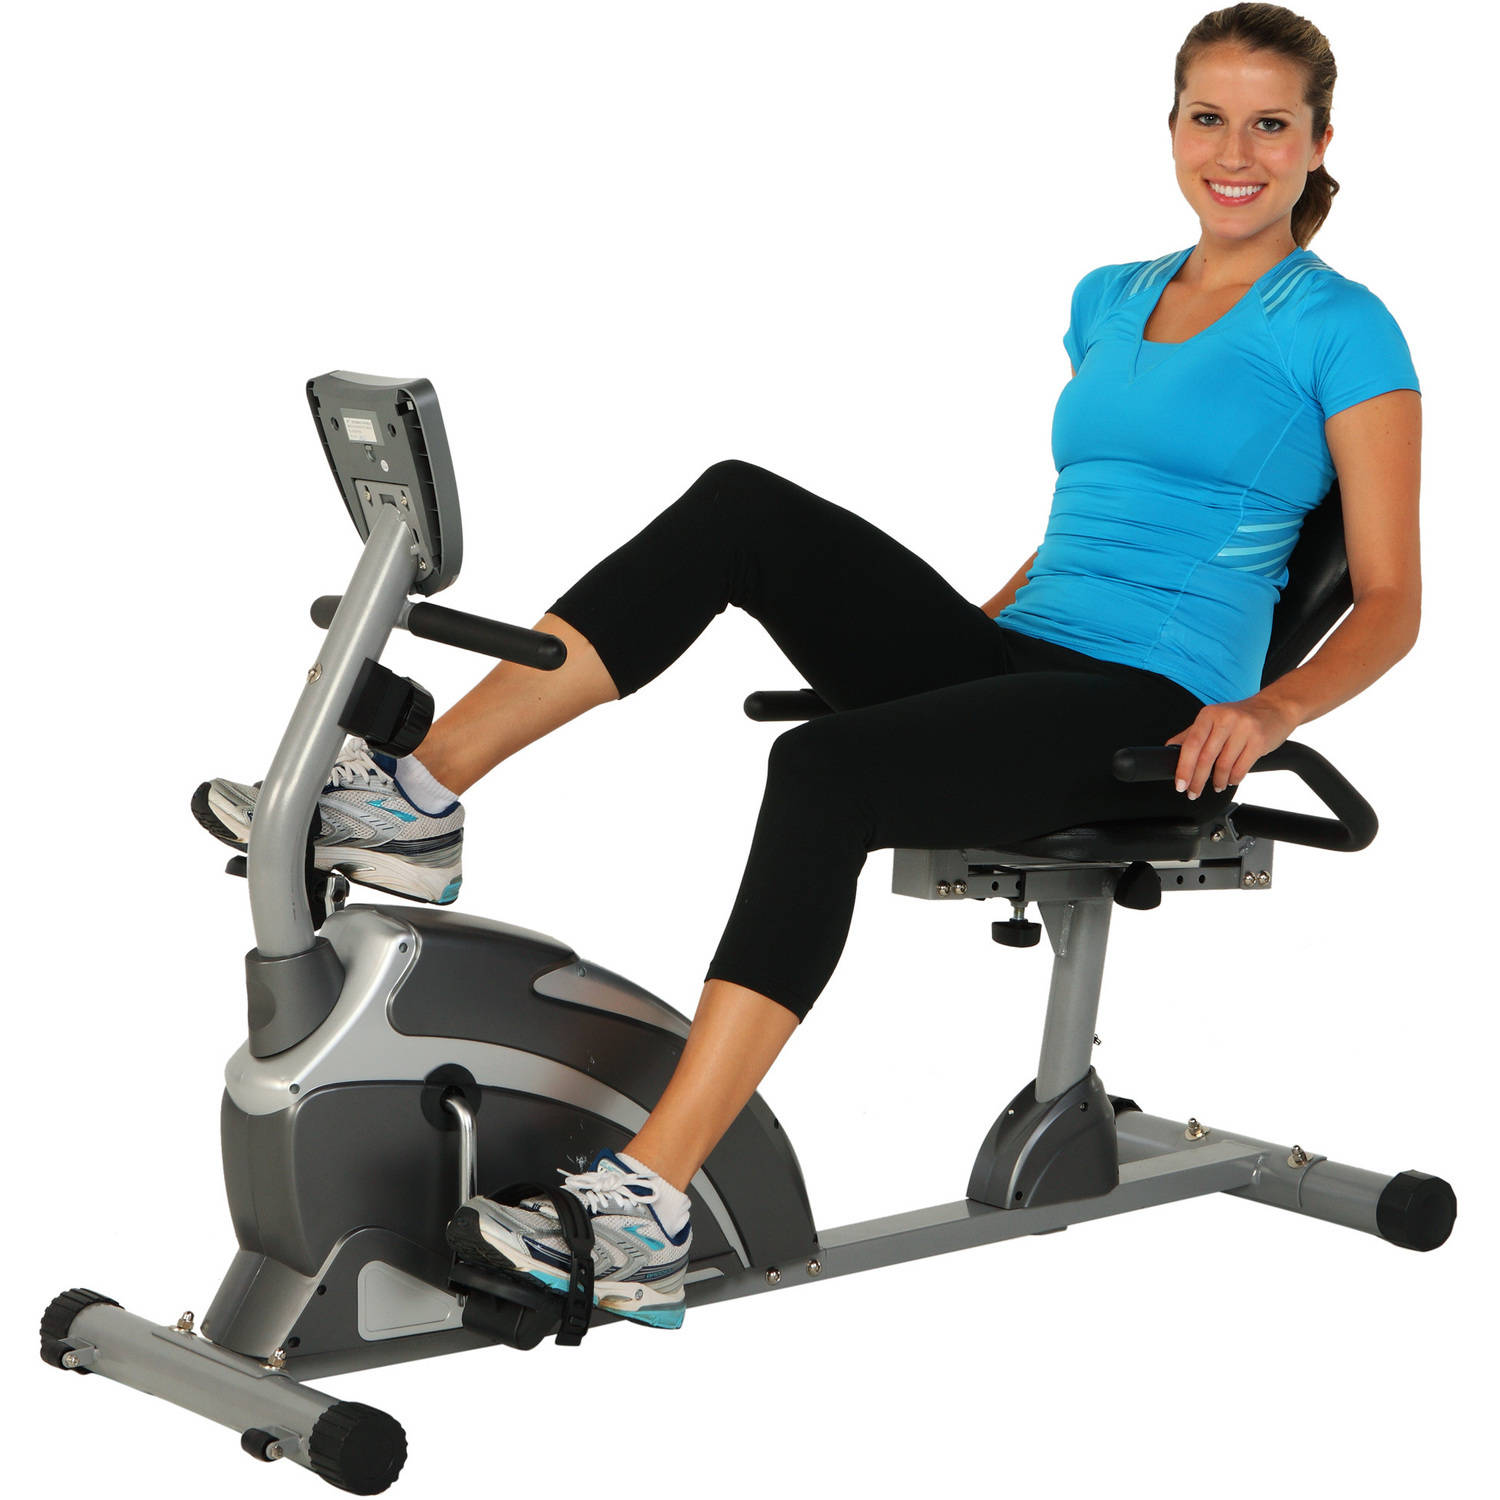 Exerpeutic 1000 High-Capacity Magnetic Recumbent Exercise Bike with Pulse - image 1 of 10